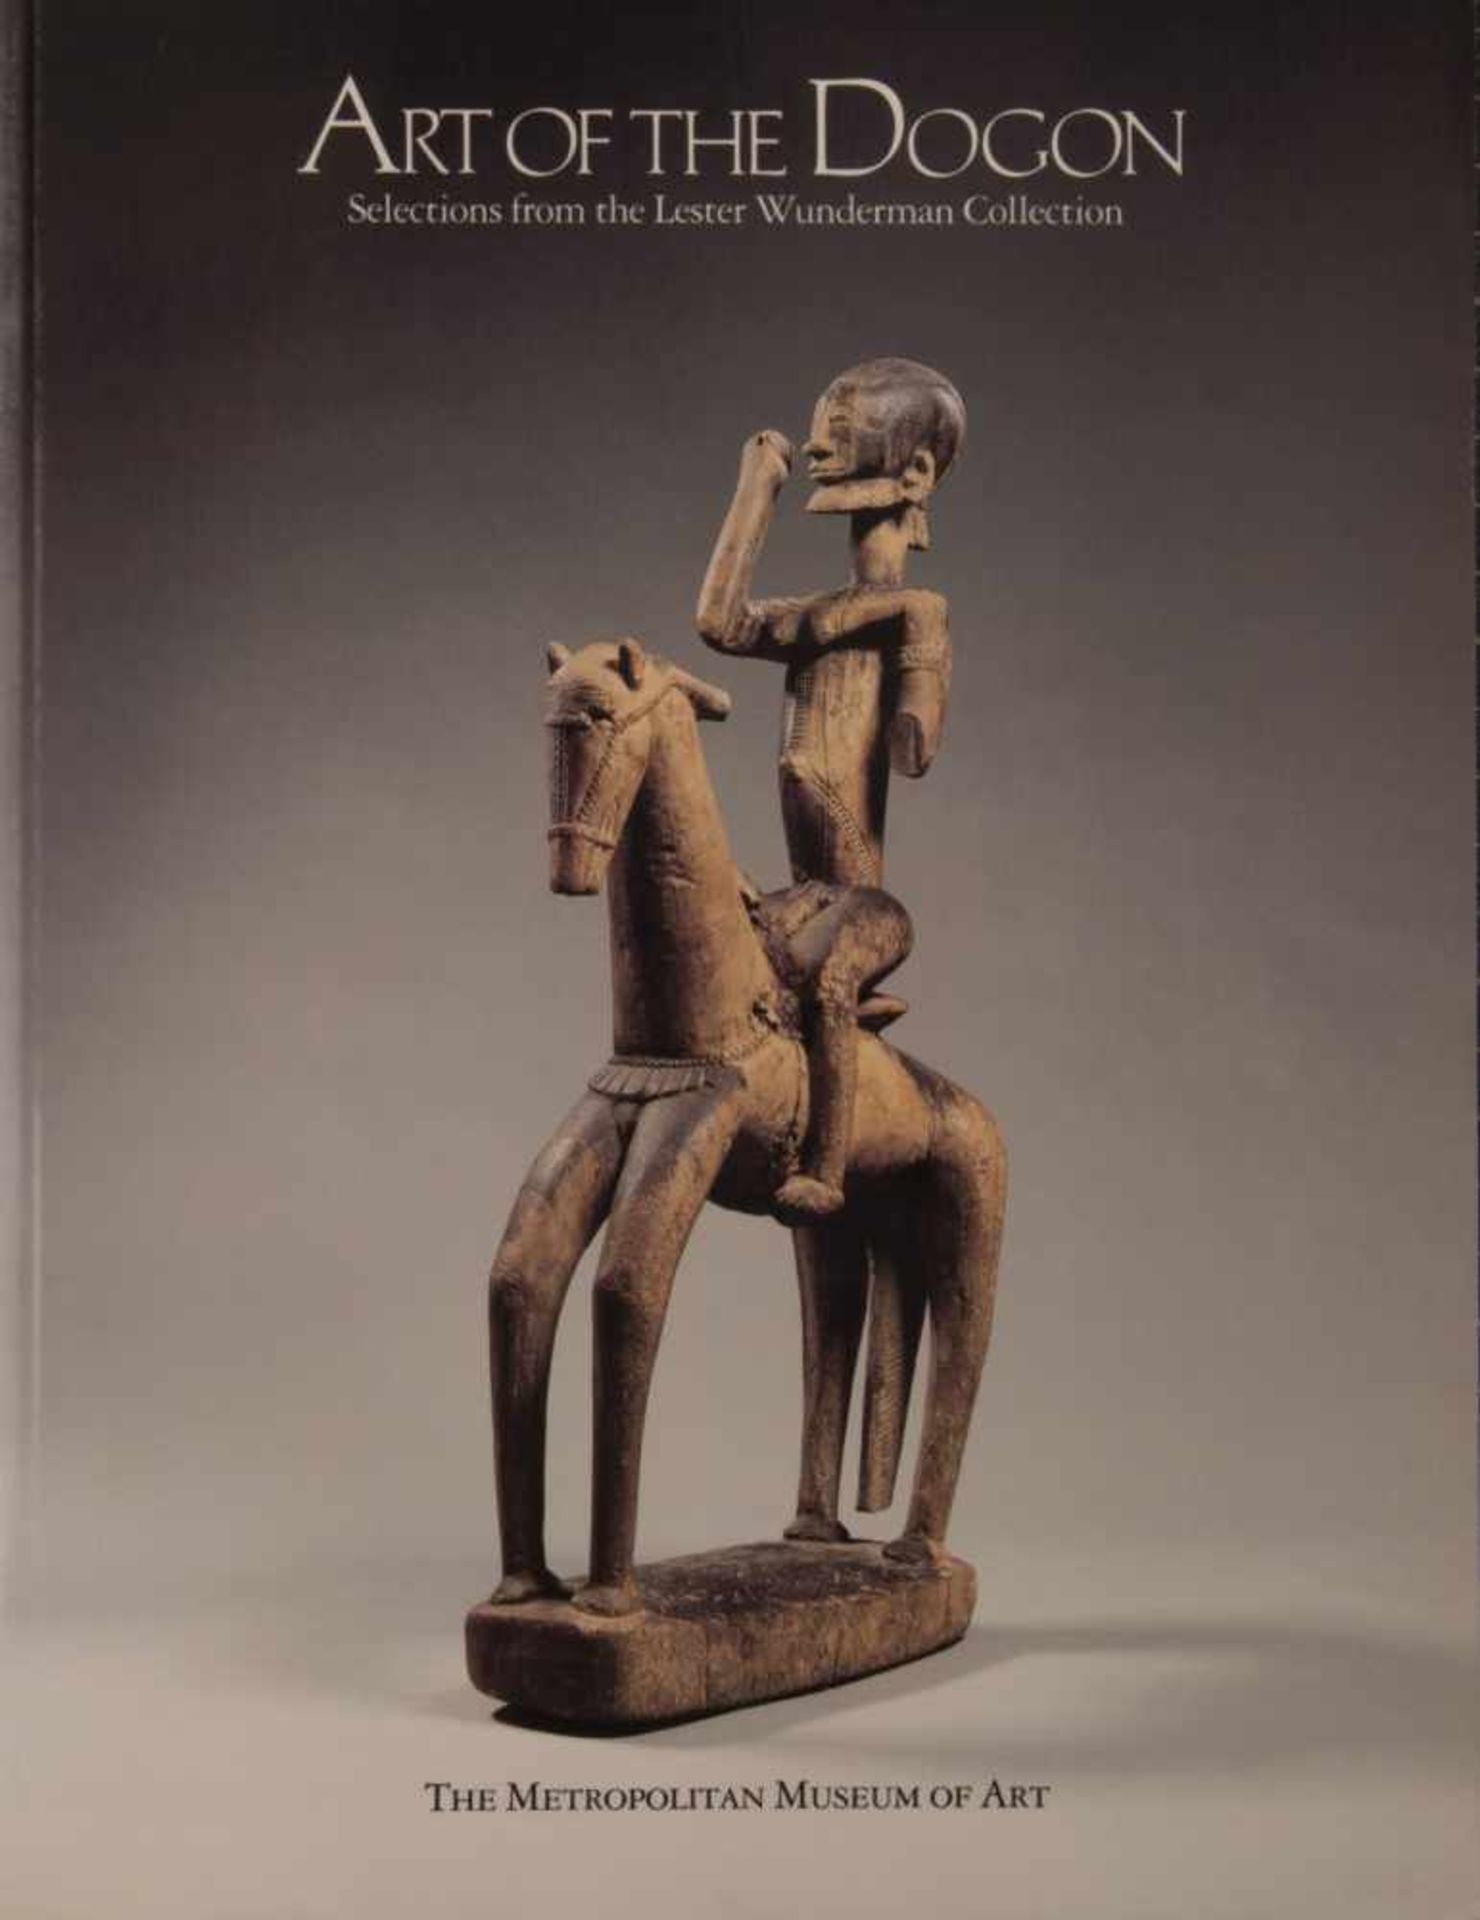 Kate Ezra, Art of the Dogon. Selections from the Lester Wunderman Collection, 1988